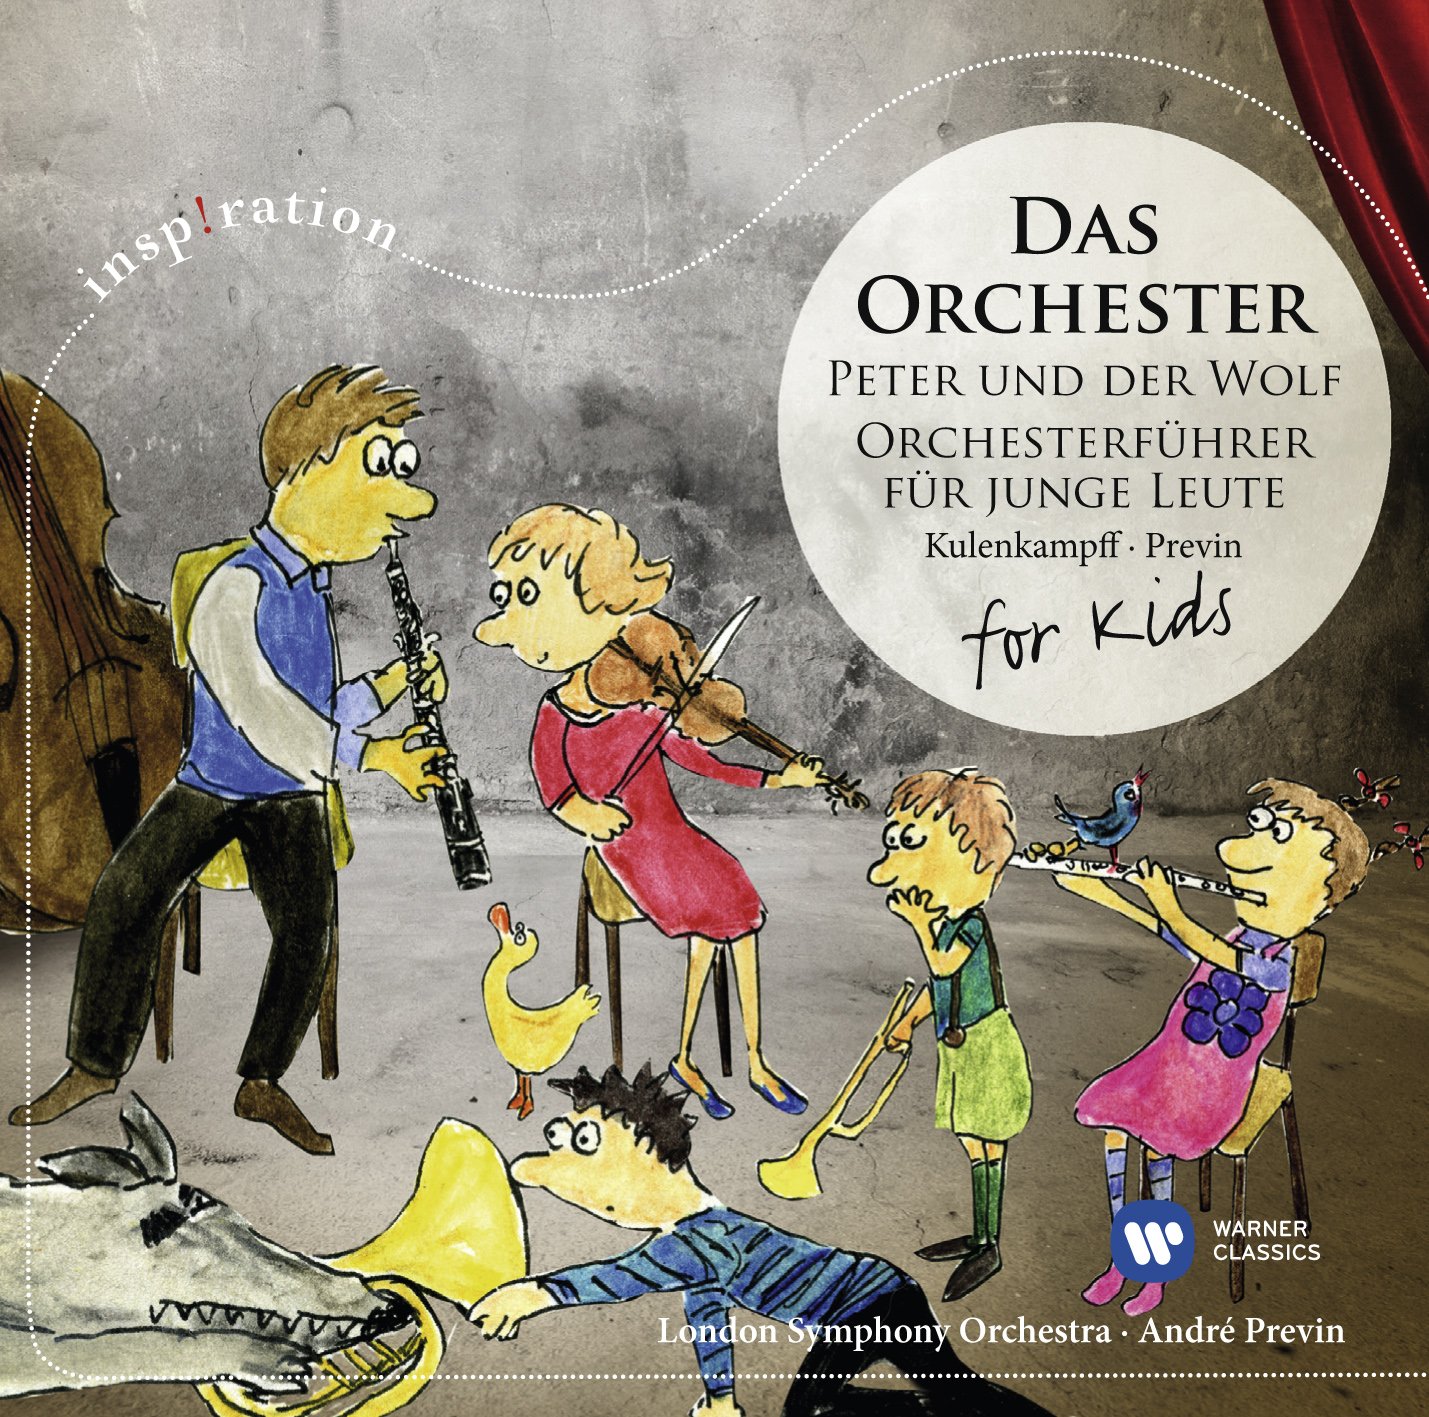 Das Orchester – For Kids